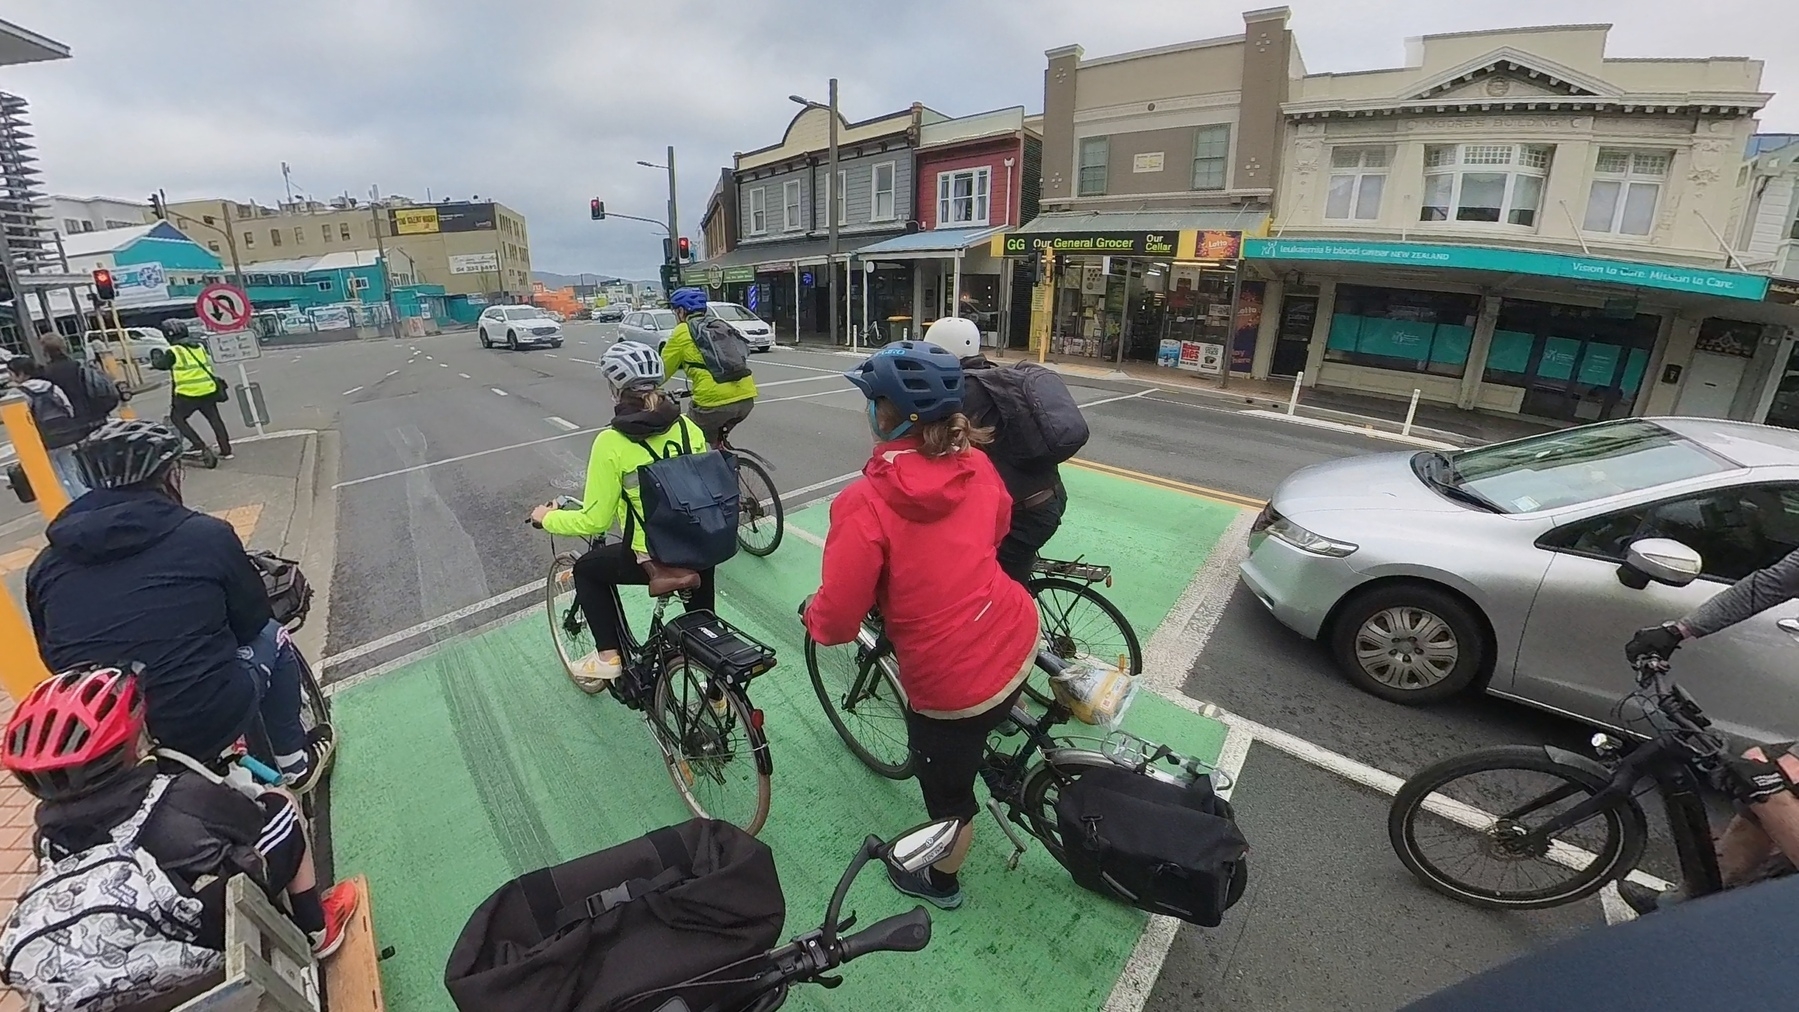 myself and 6 other bike commuters waiting at the lights in Newtown this morning.